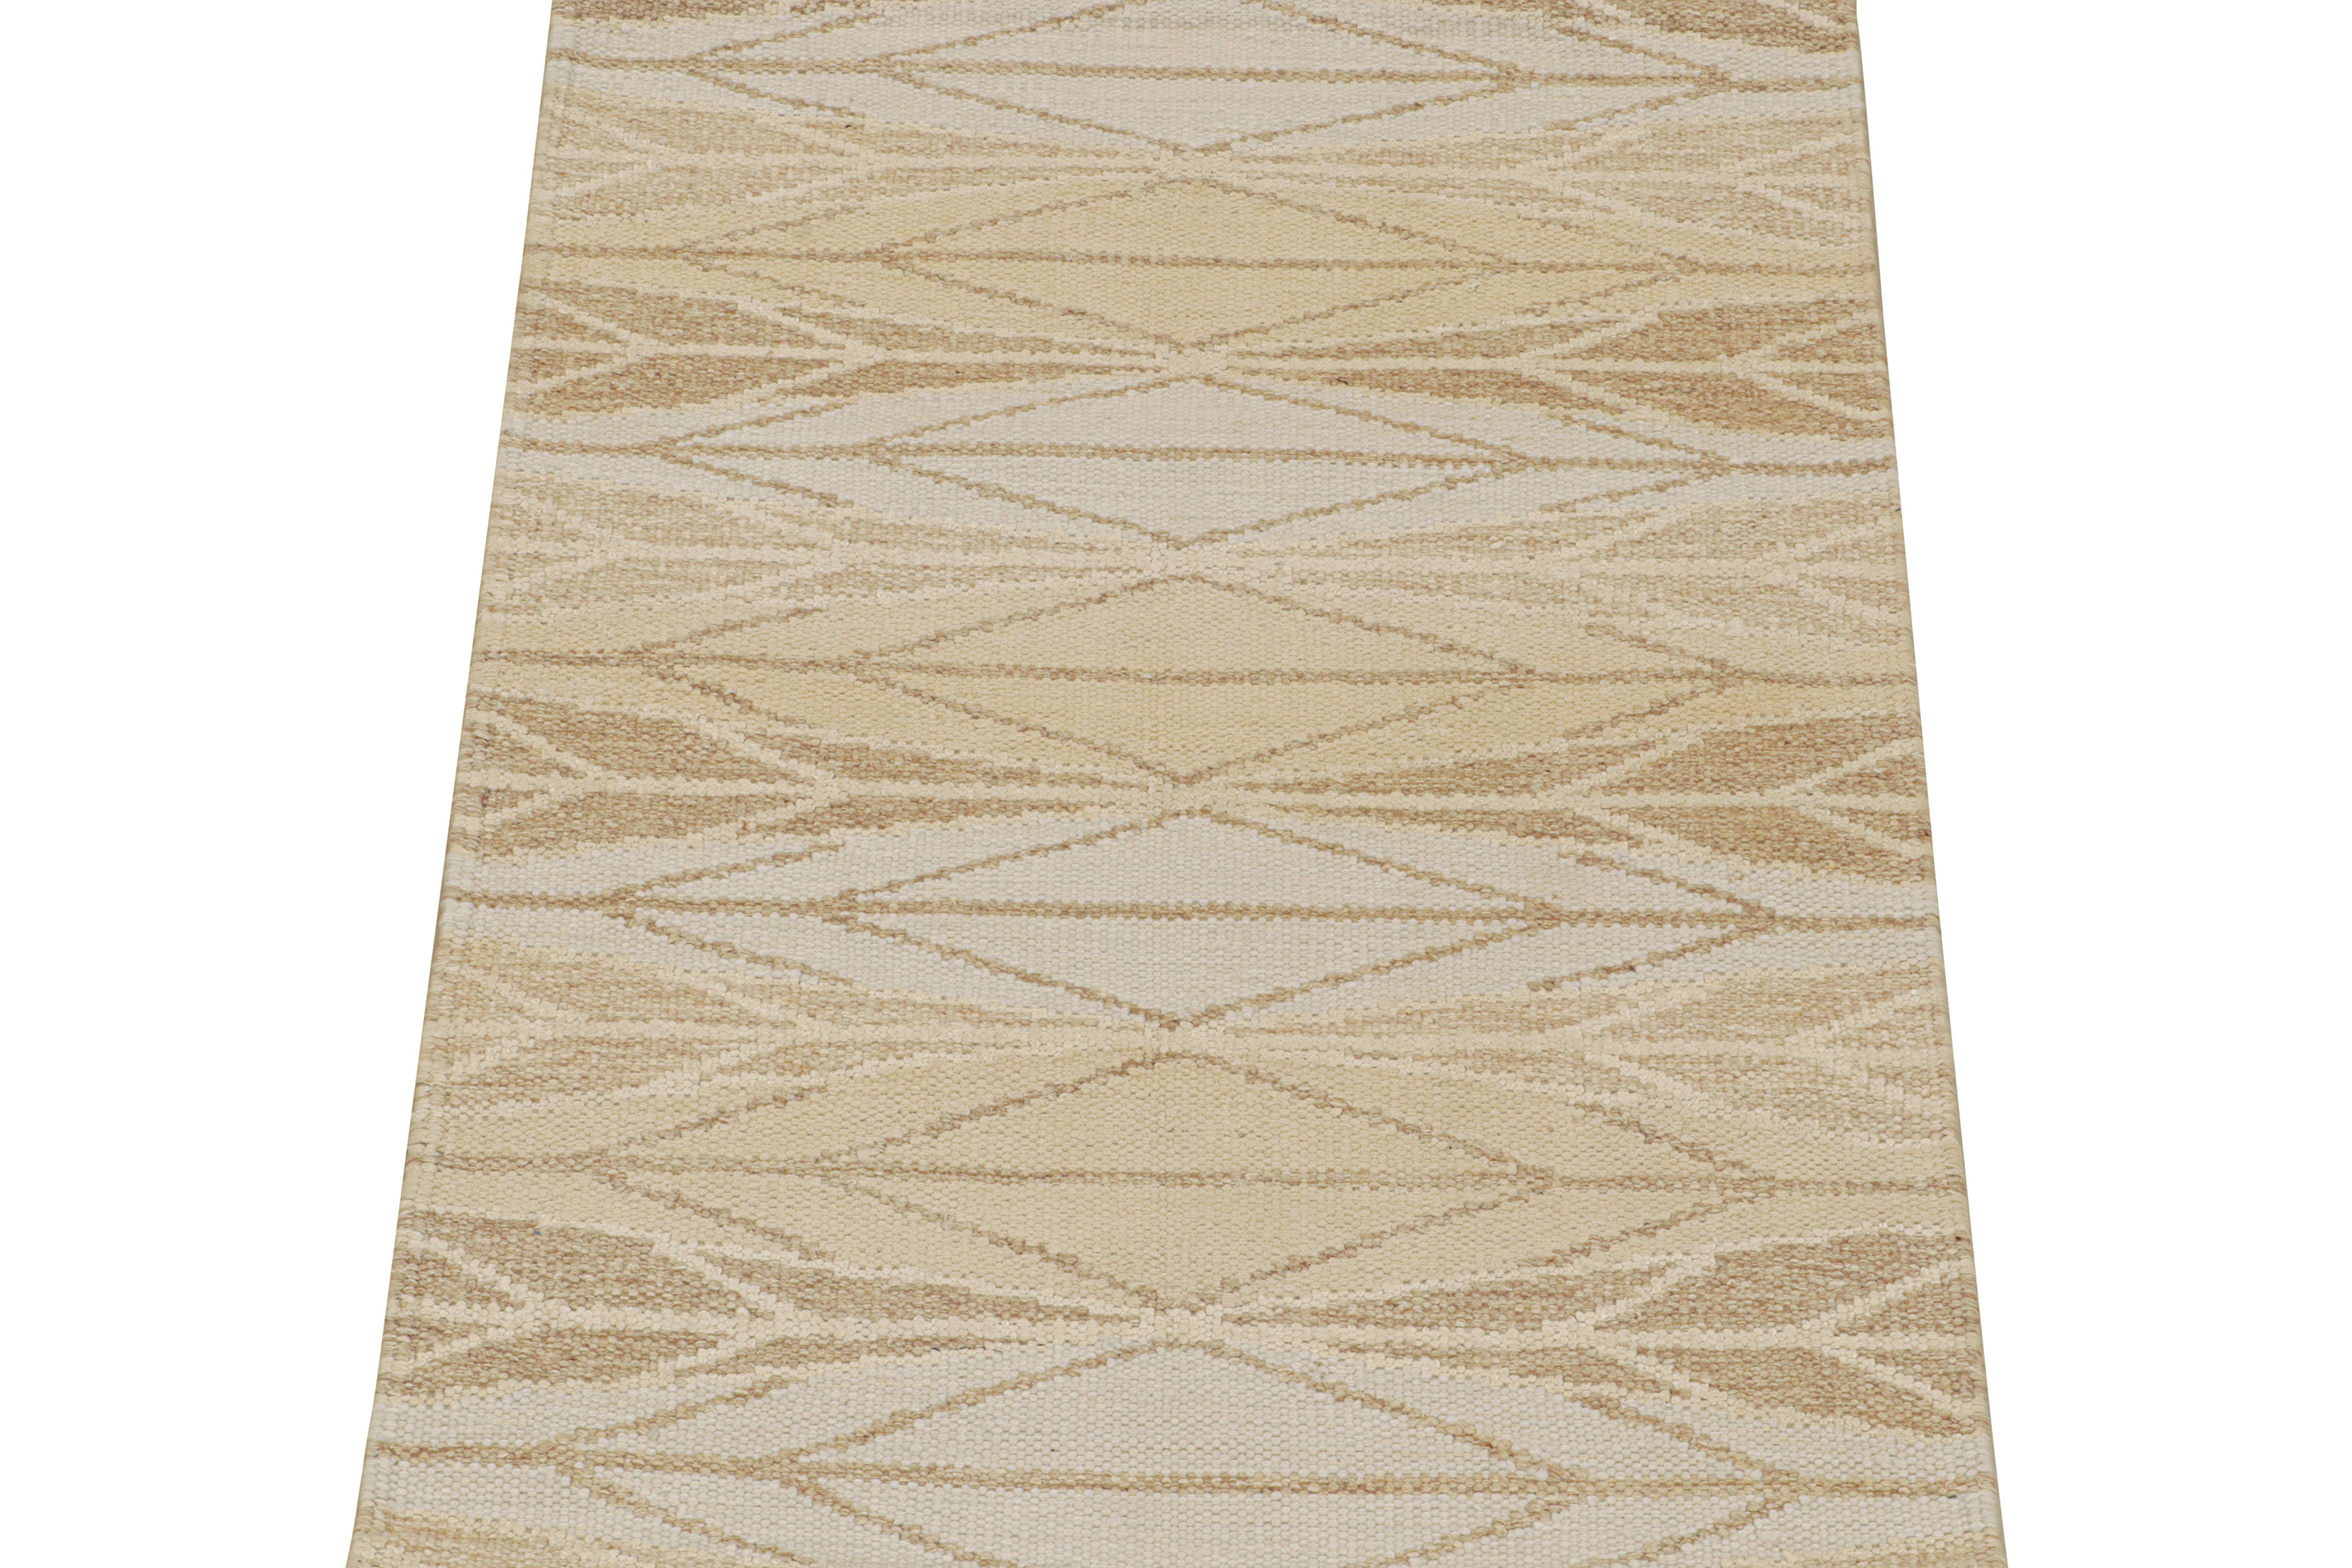 This 3x5 flat weave rug is a bold new addition to the Scandinavian Collection by Rug & Kilim. Handwoven in wool and natural yarns, its design reflects a contemporary take on mid-century Rollakans and Swedish Deco style.

On the Design:

This new